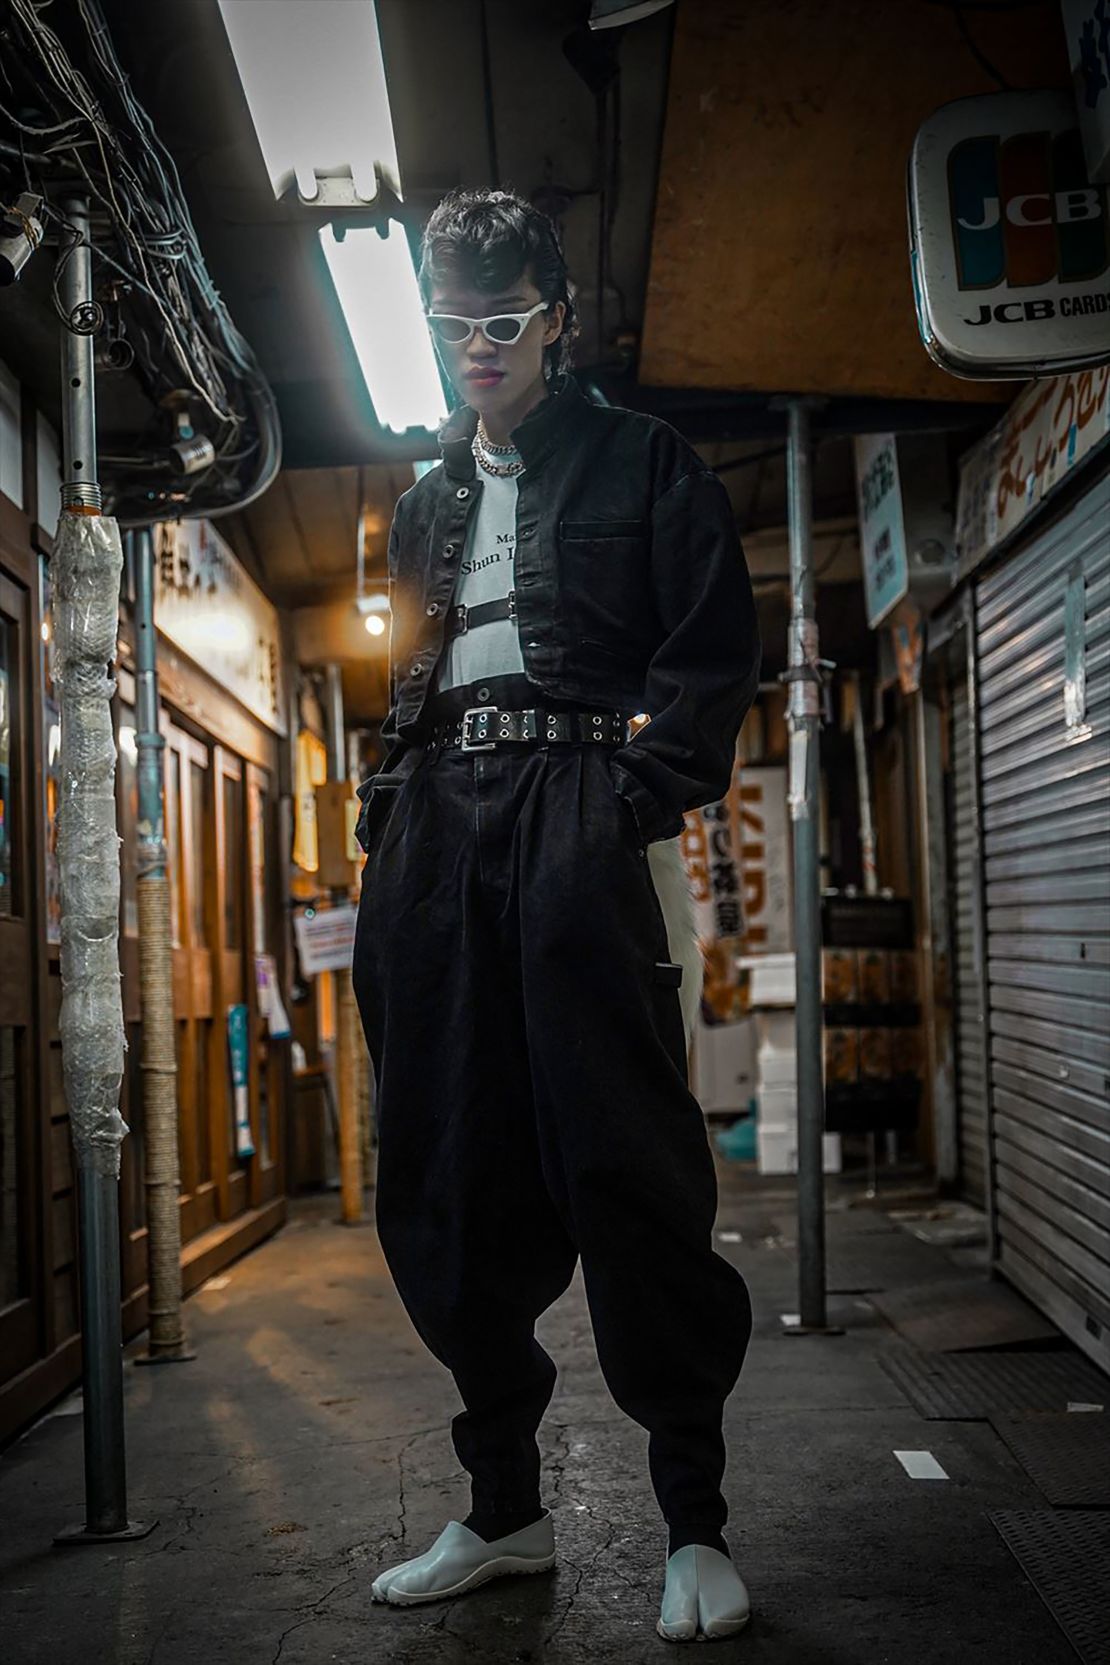 Cropped denim jackets were paired with wide-legged trousers -- a style favored by the subculture. Ishizawa said the pursuit of the "masculine" and "elegance" was central to his brand.